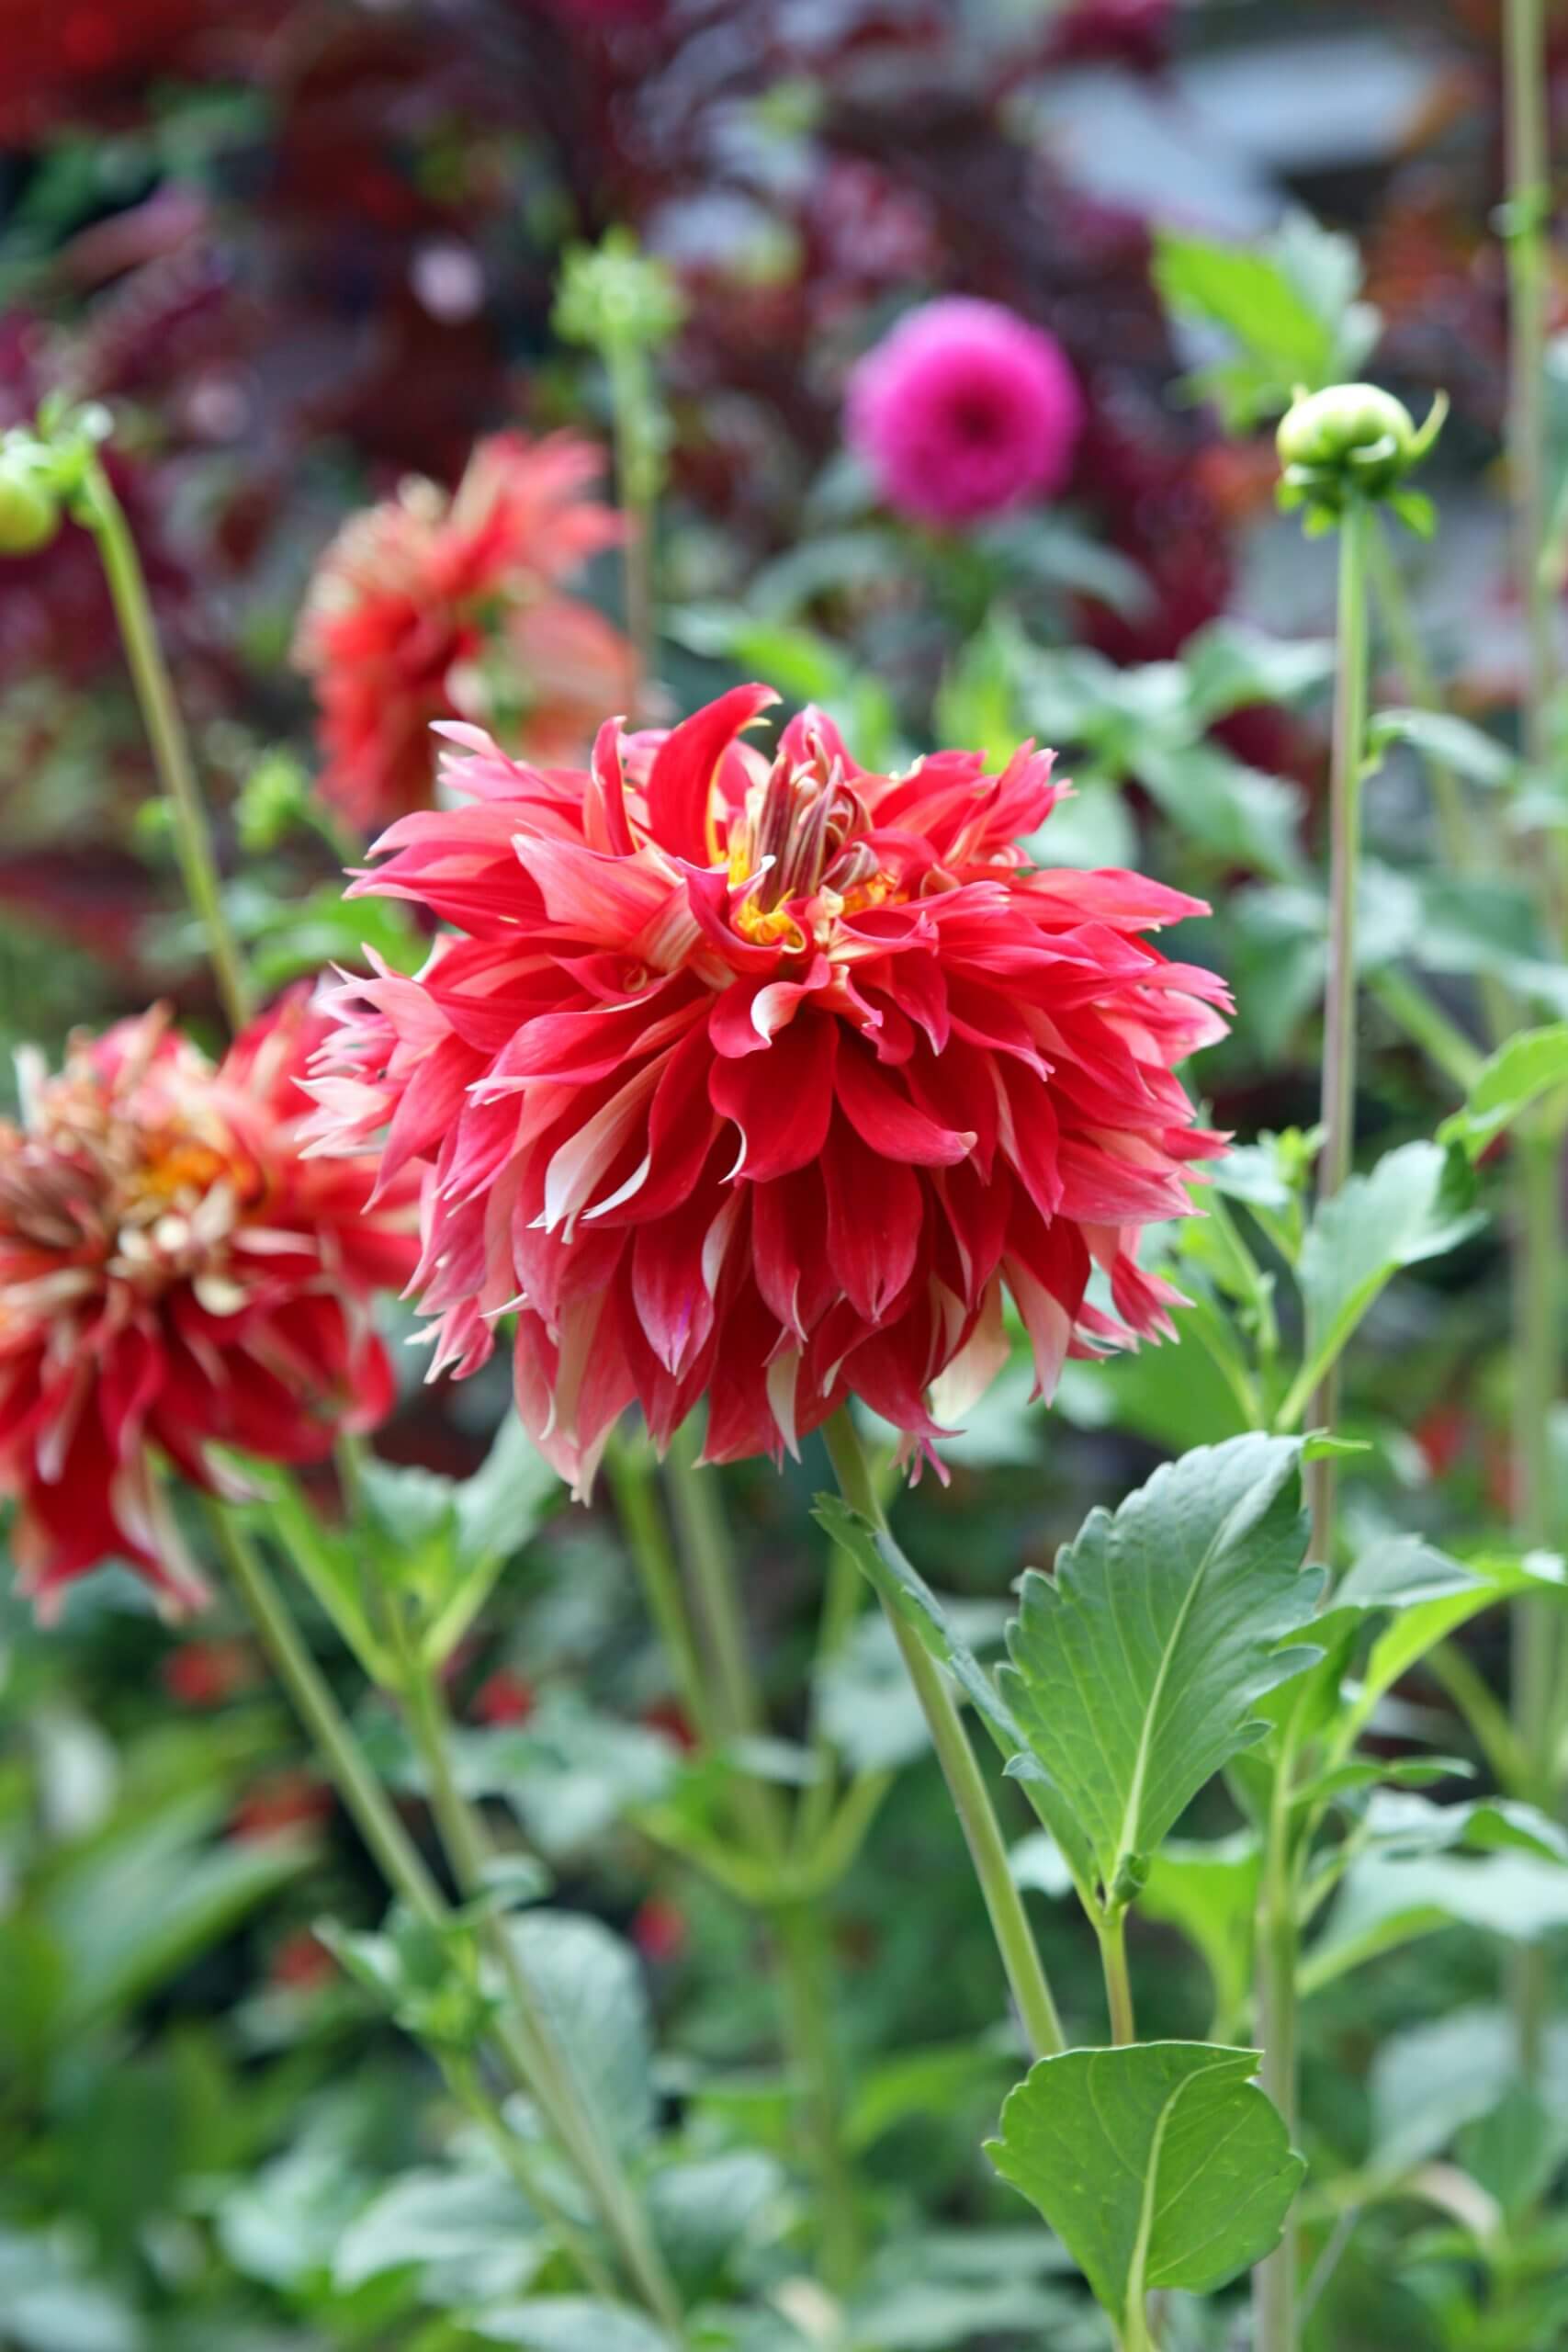 Some giant Dahlias, ‘Bodacious’, need staking to keep plants from flopping.